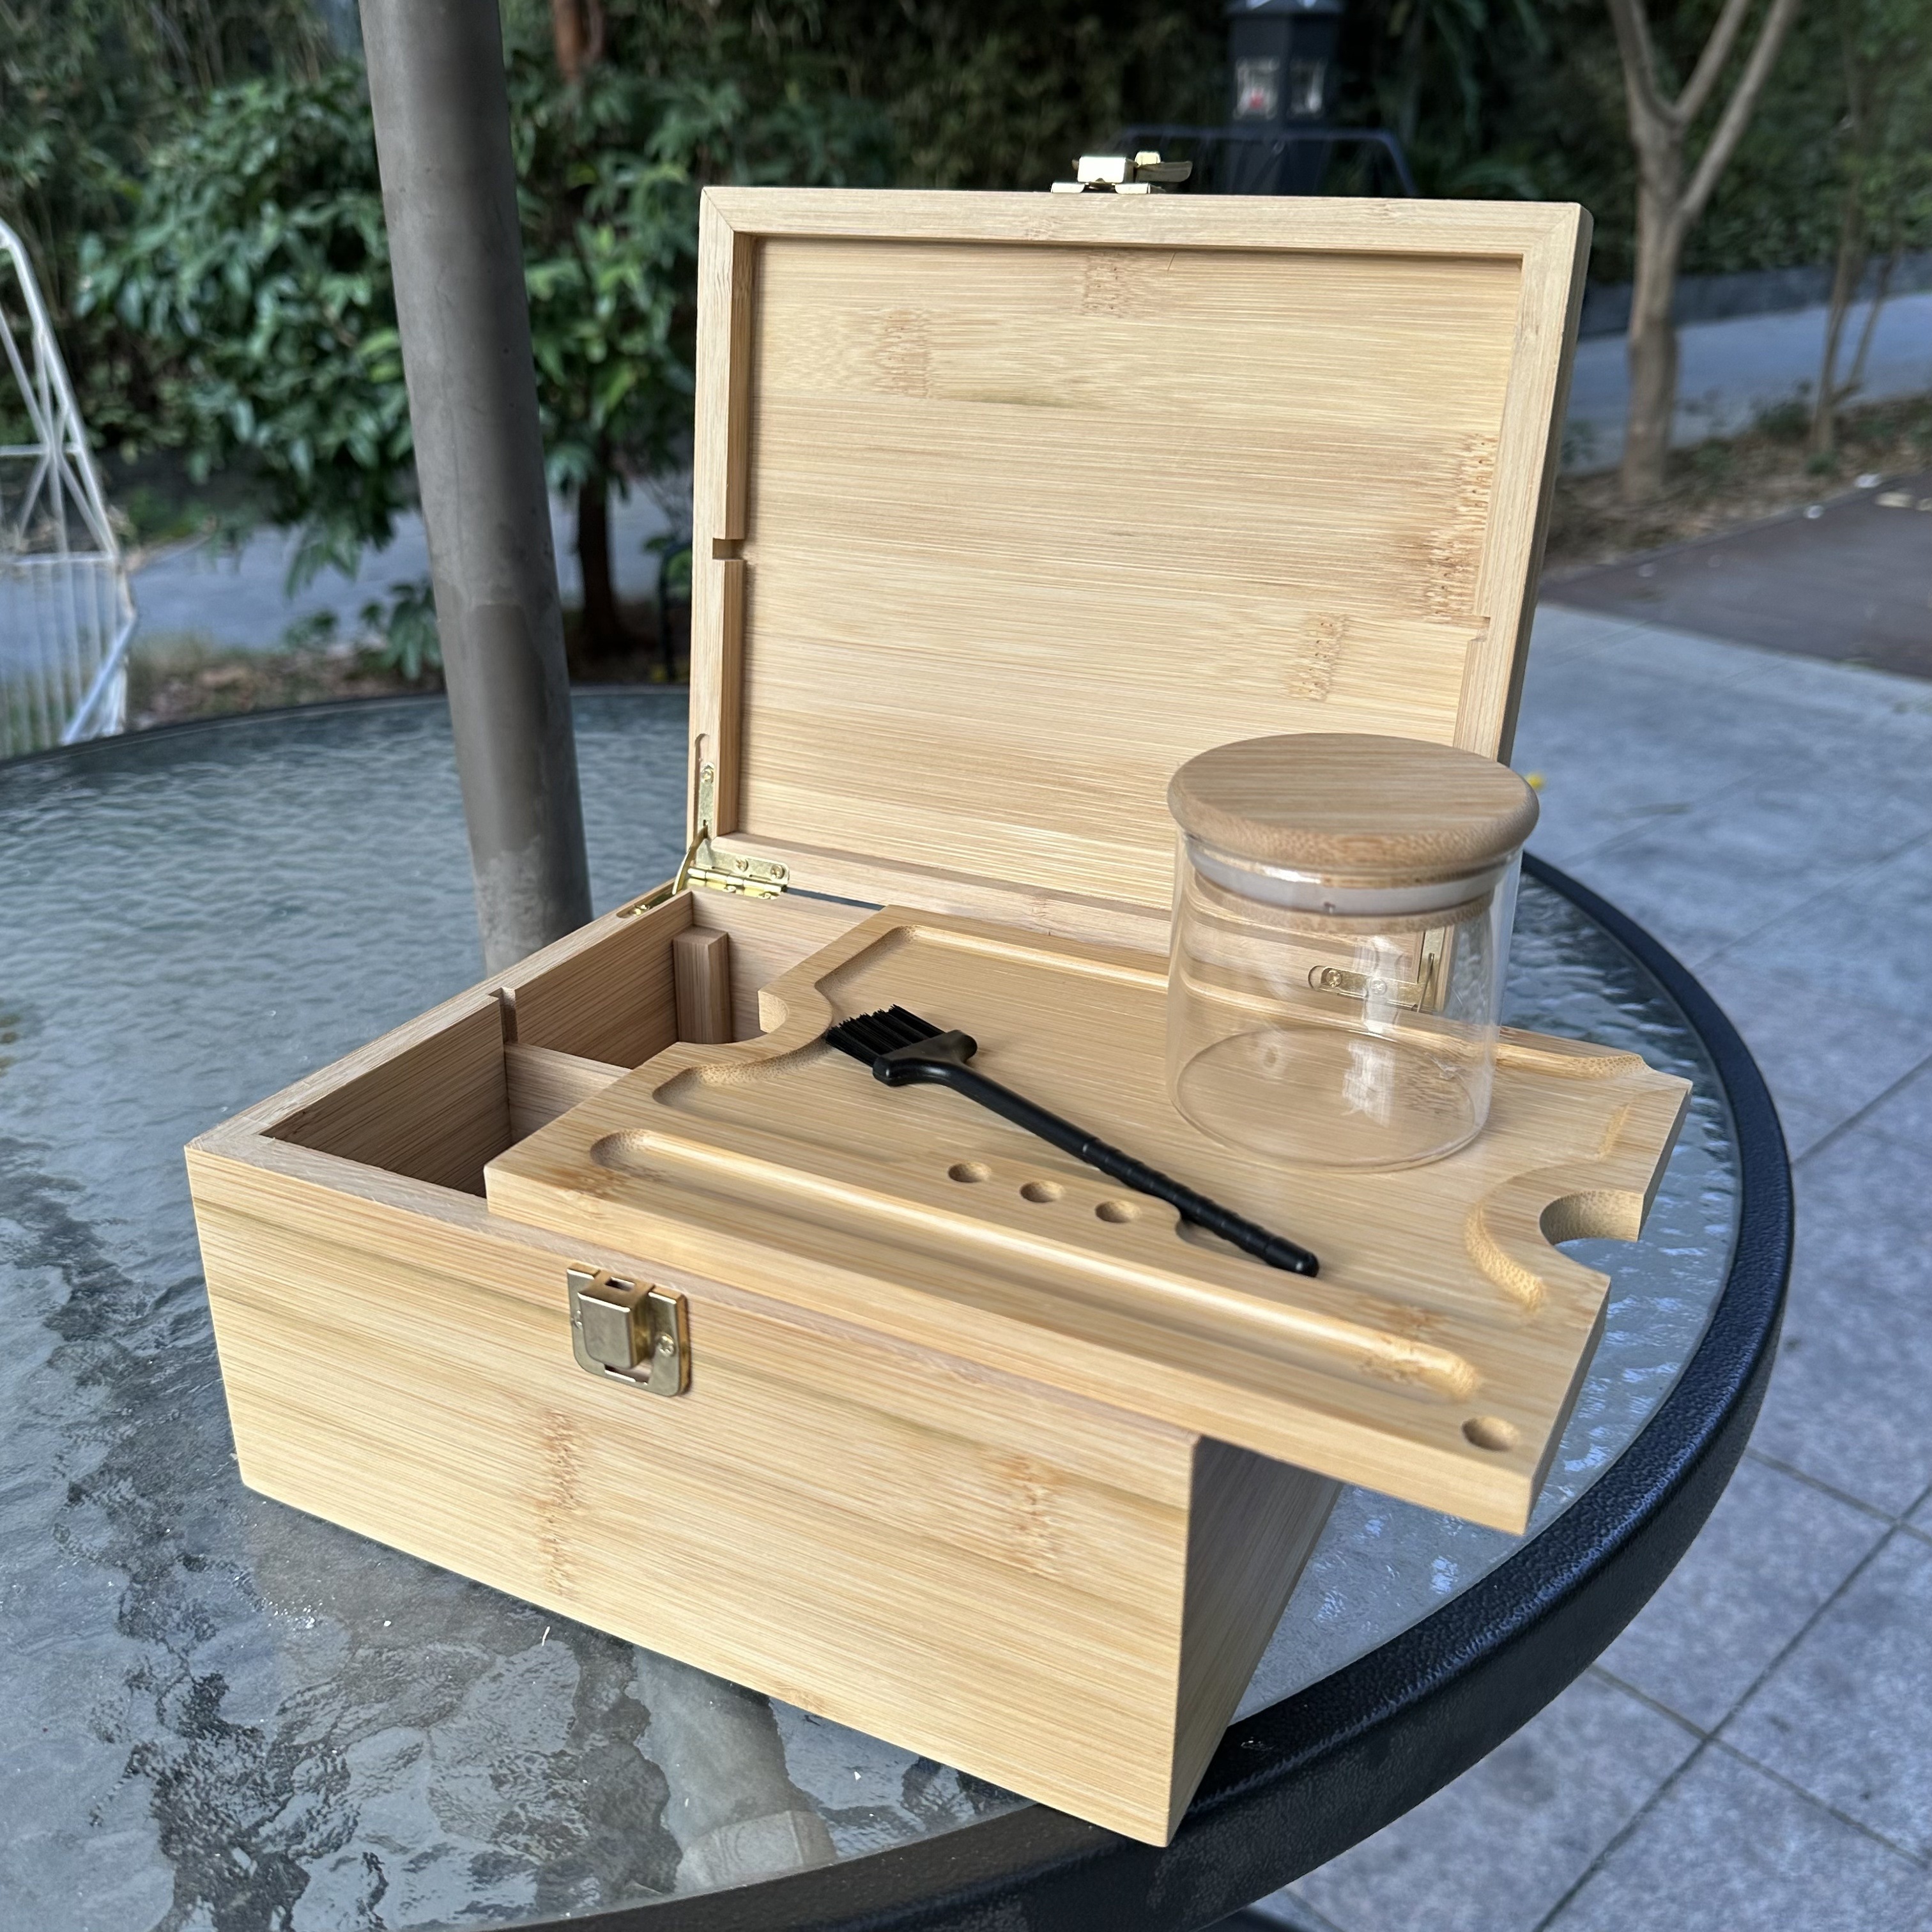 1set, Large Stash Box, Wooden Storage Box With Tray, Bamboo Storage Box  With Lock And Accessories, Smoking Paper Anti-odor Canister Private Box  With B